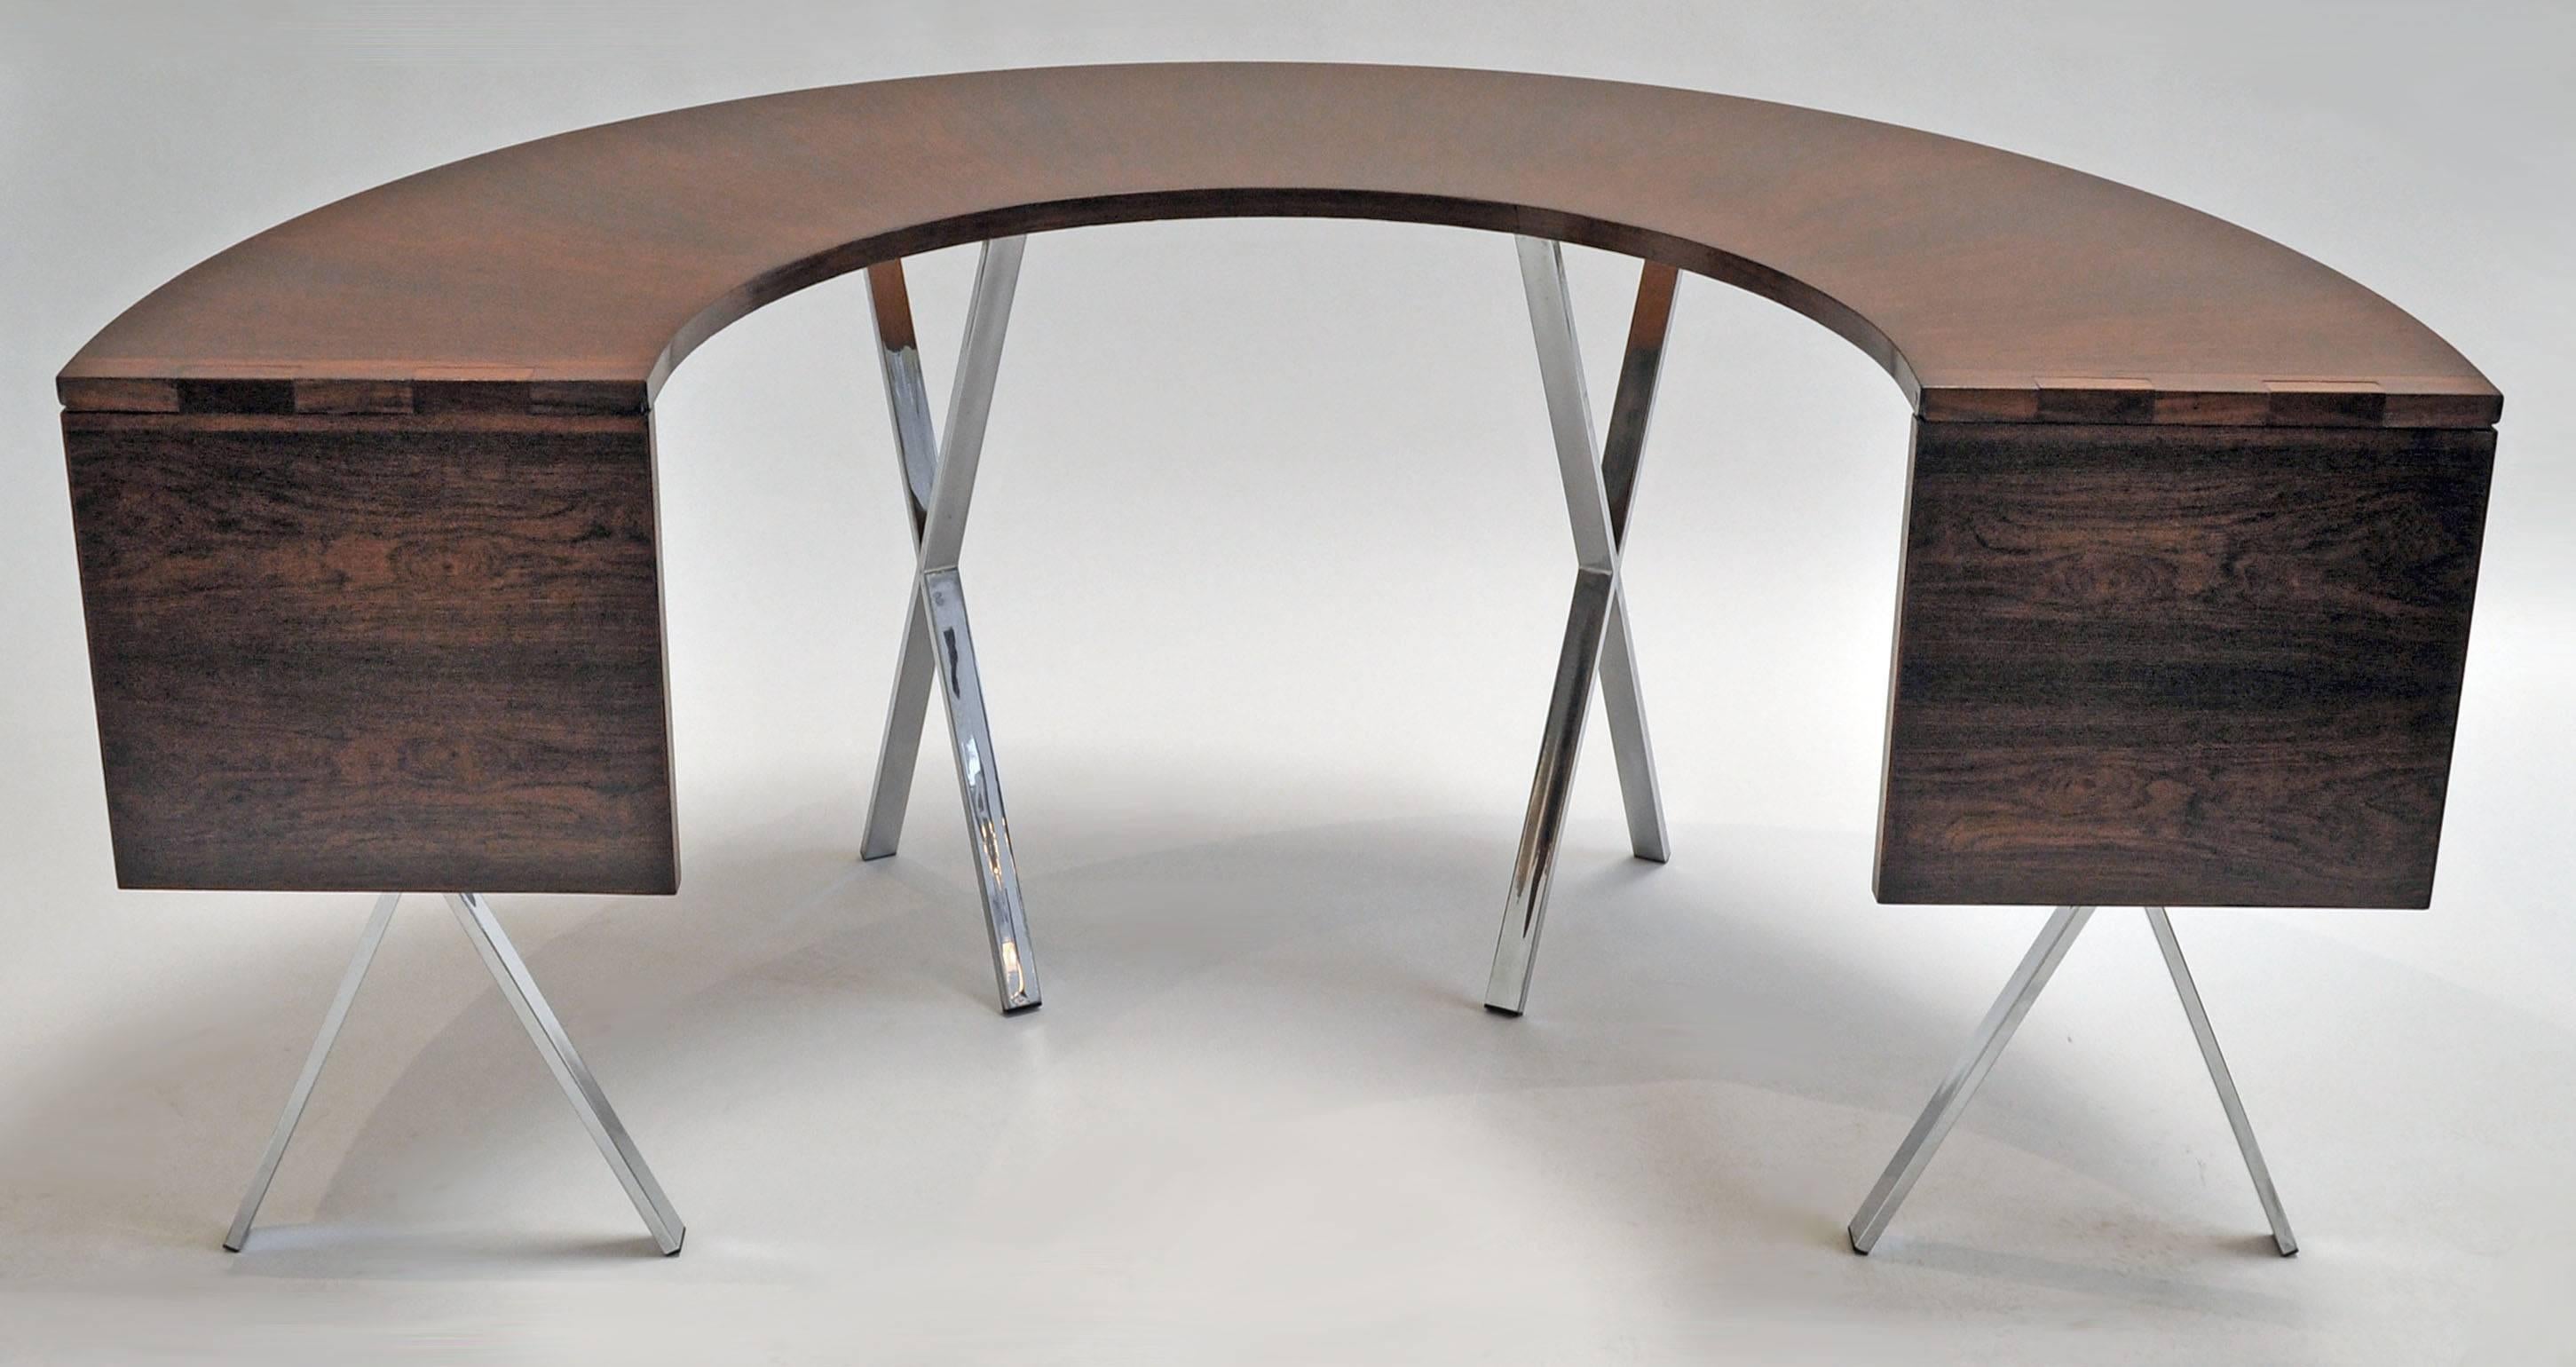 Drop-leaf table designed by Riis Antonsen. 